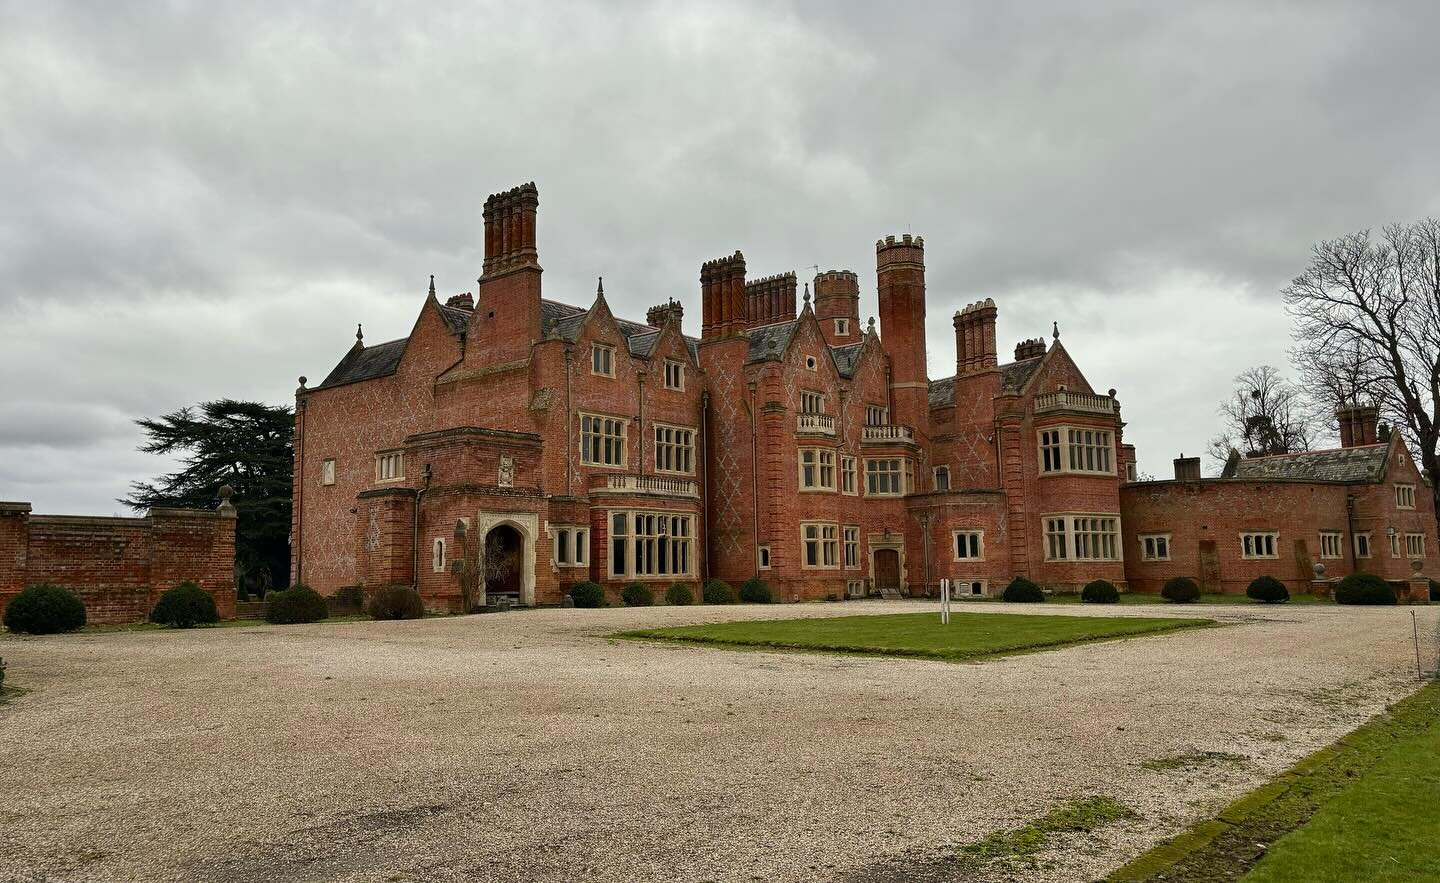 We are delighted to have been appointed for this incredible stately home project. It&rsquo;s undertaking a full, sensitive restoration. #heritage projects really resonate with us at The Lighting Asylum. #stately #lightingdesign  #mansion #residential